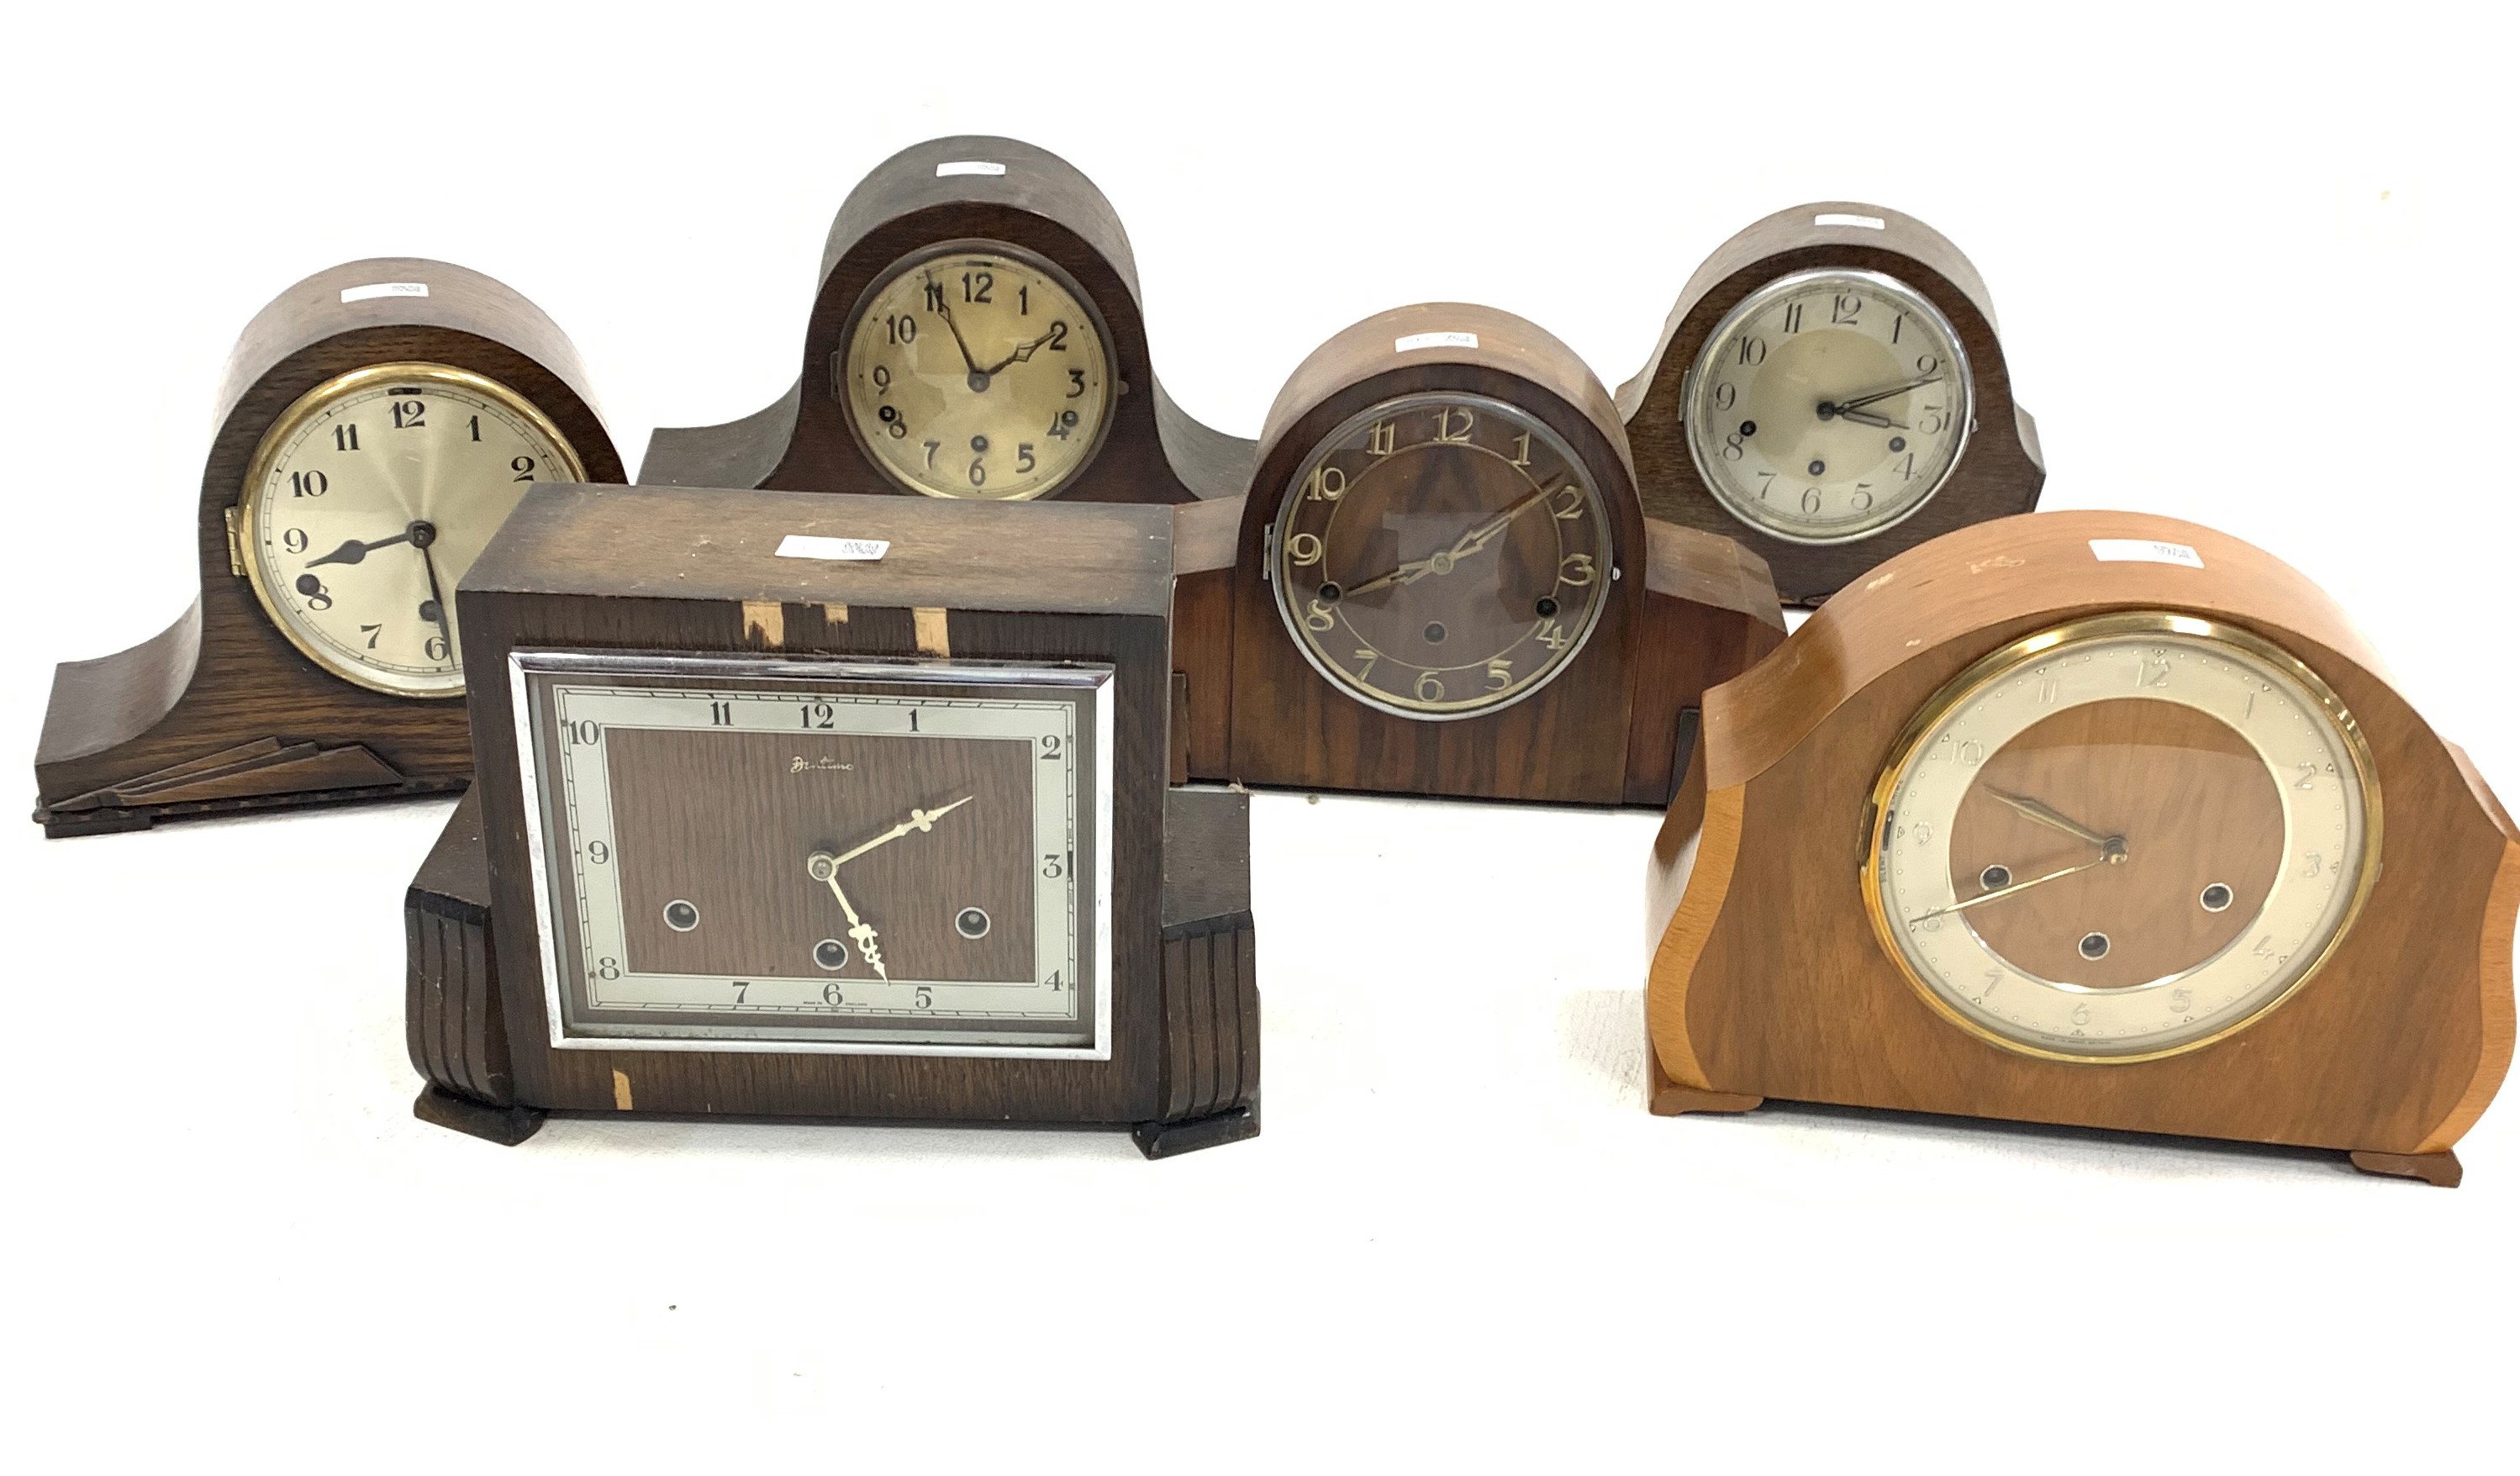 Early 20th century 'Bentimo' Art Deco mantle clock in oak veneered case, silvered chapter dial with